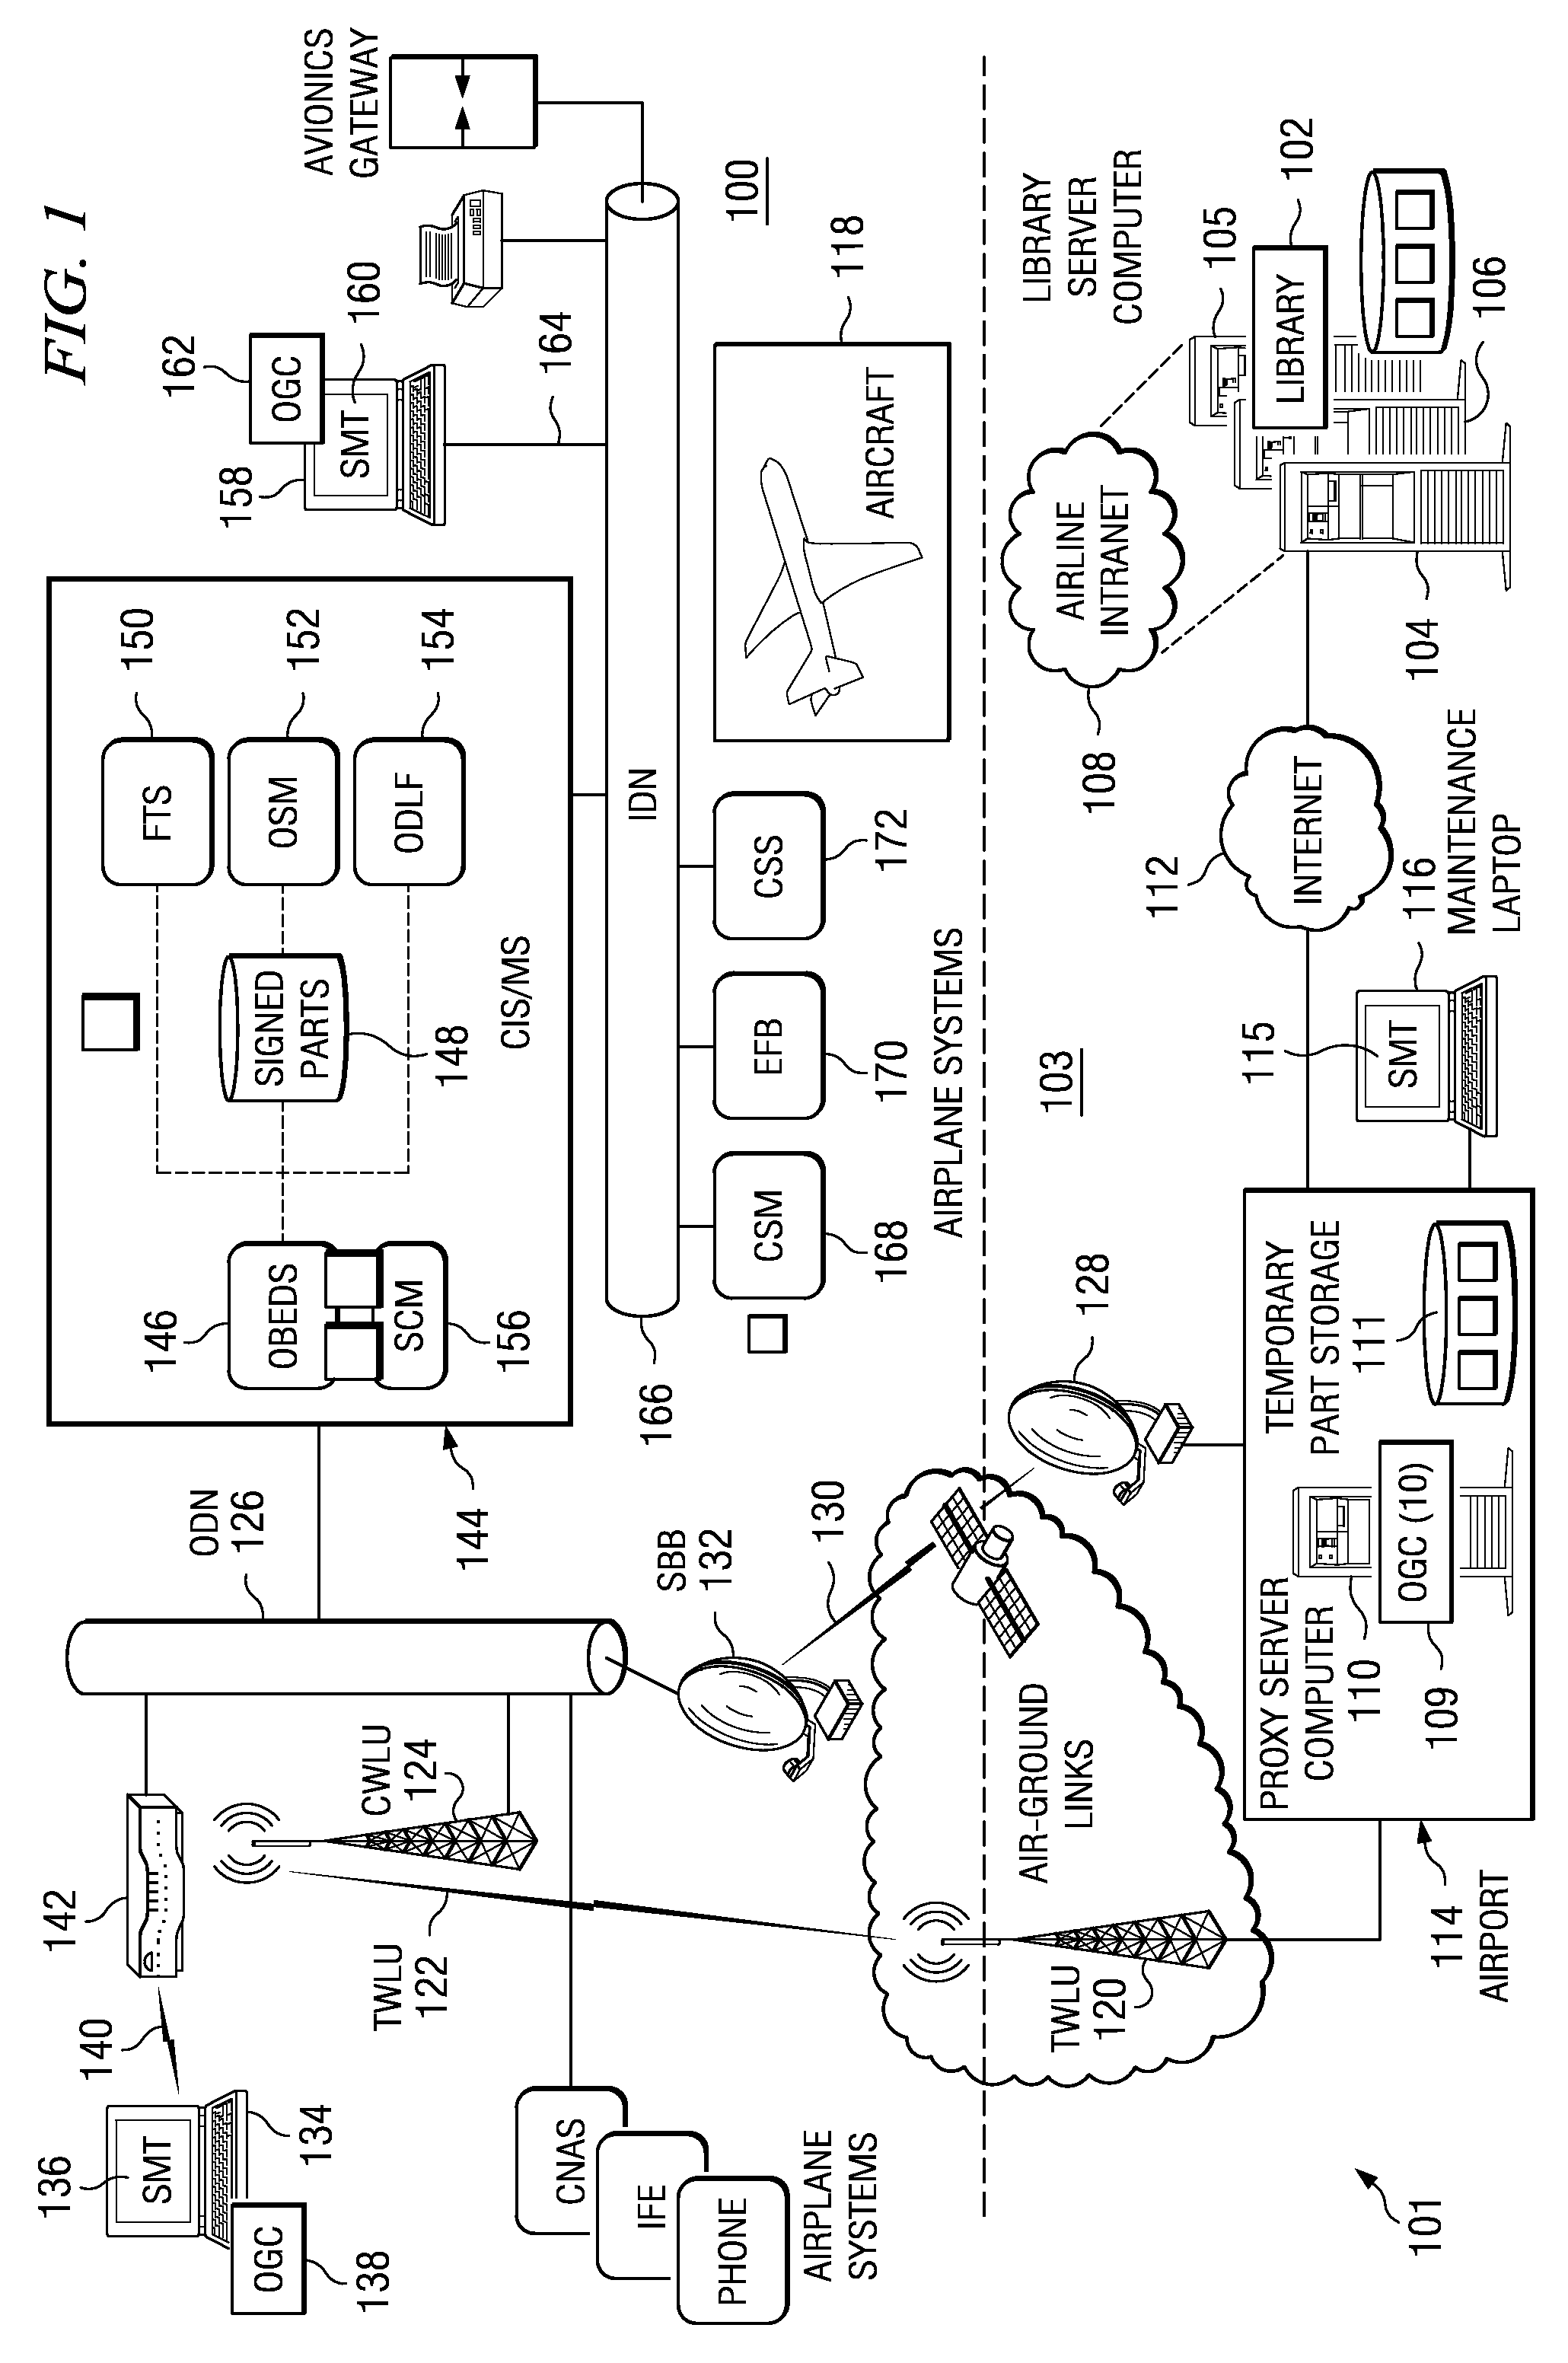 Method and Apparatus for Loadable Aircraft Software Parts Distribution